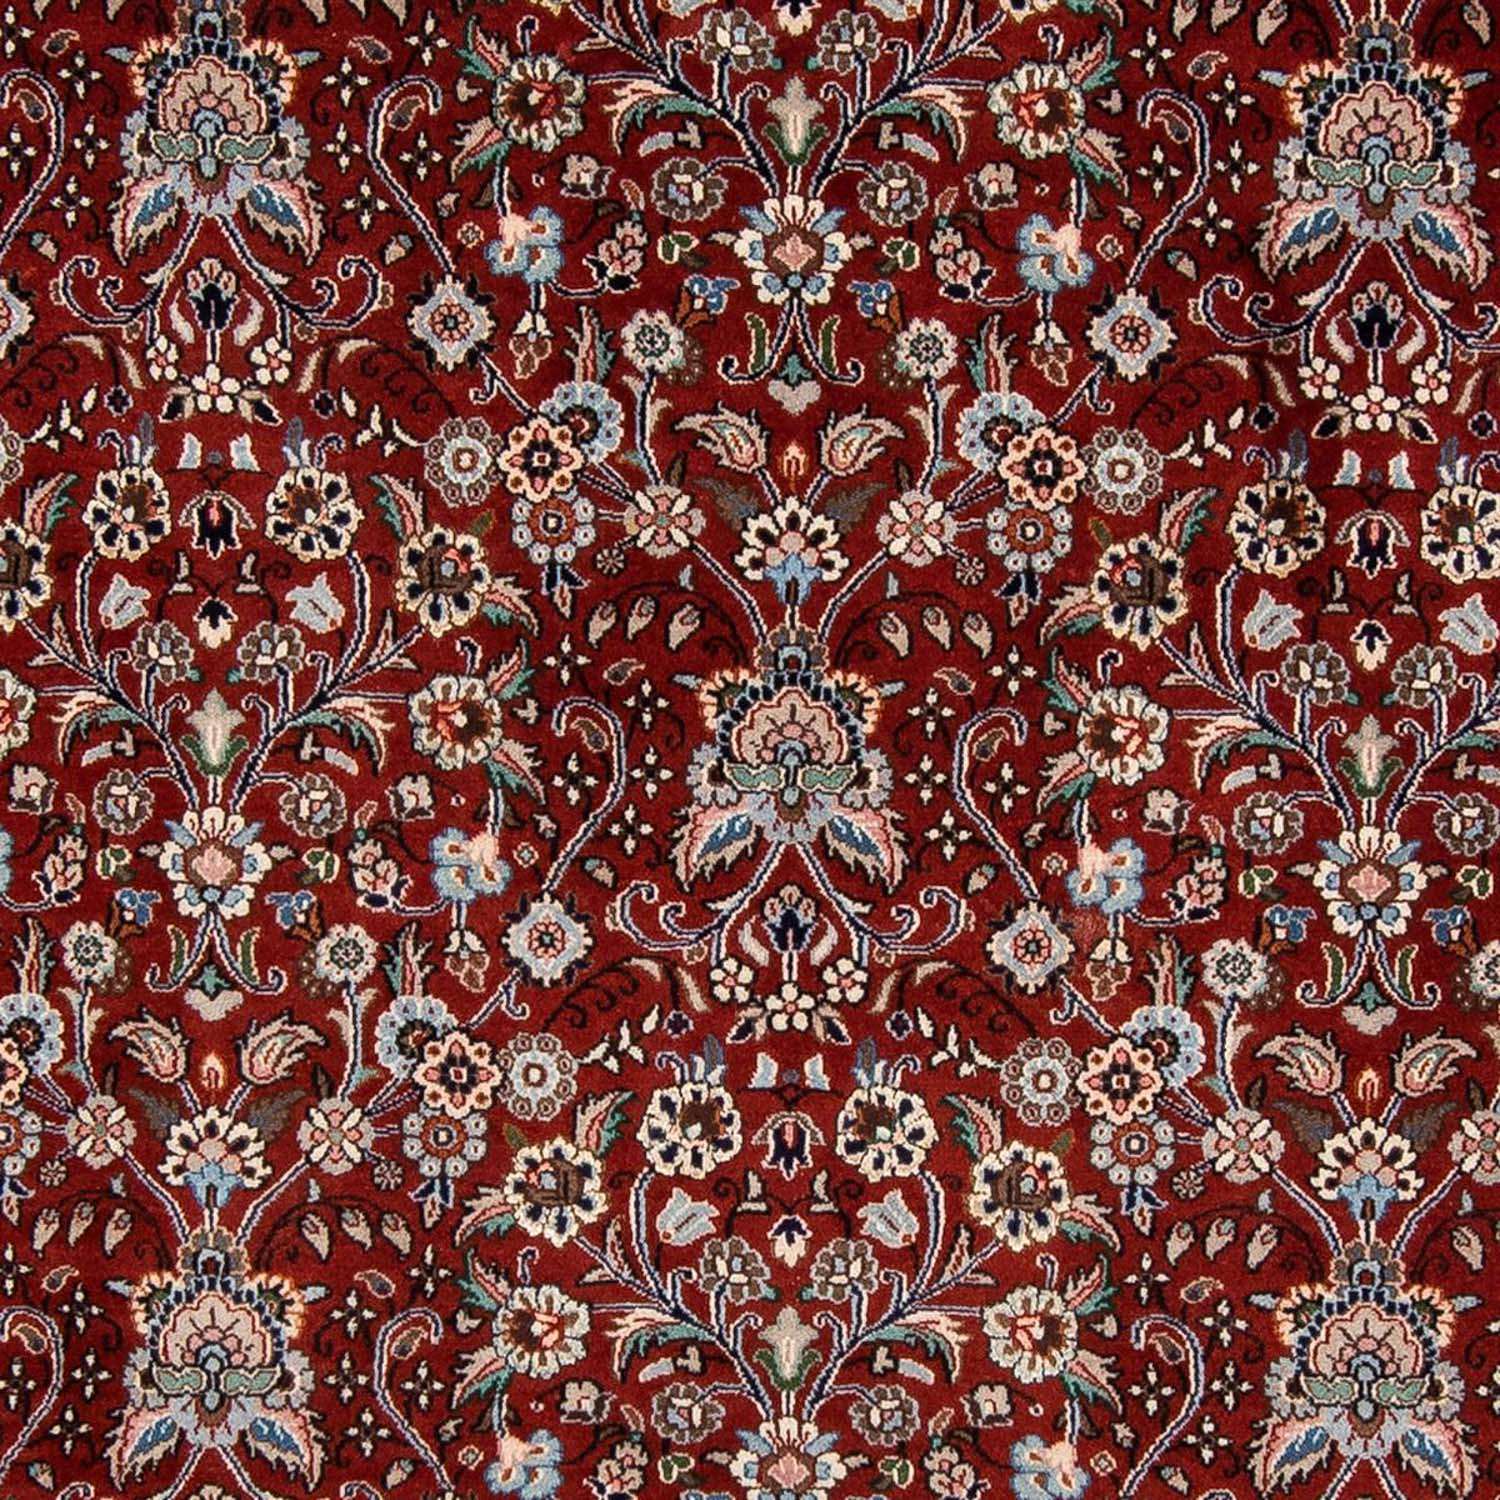 Perser Rug - Classic - 292 x 205 cm - red